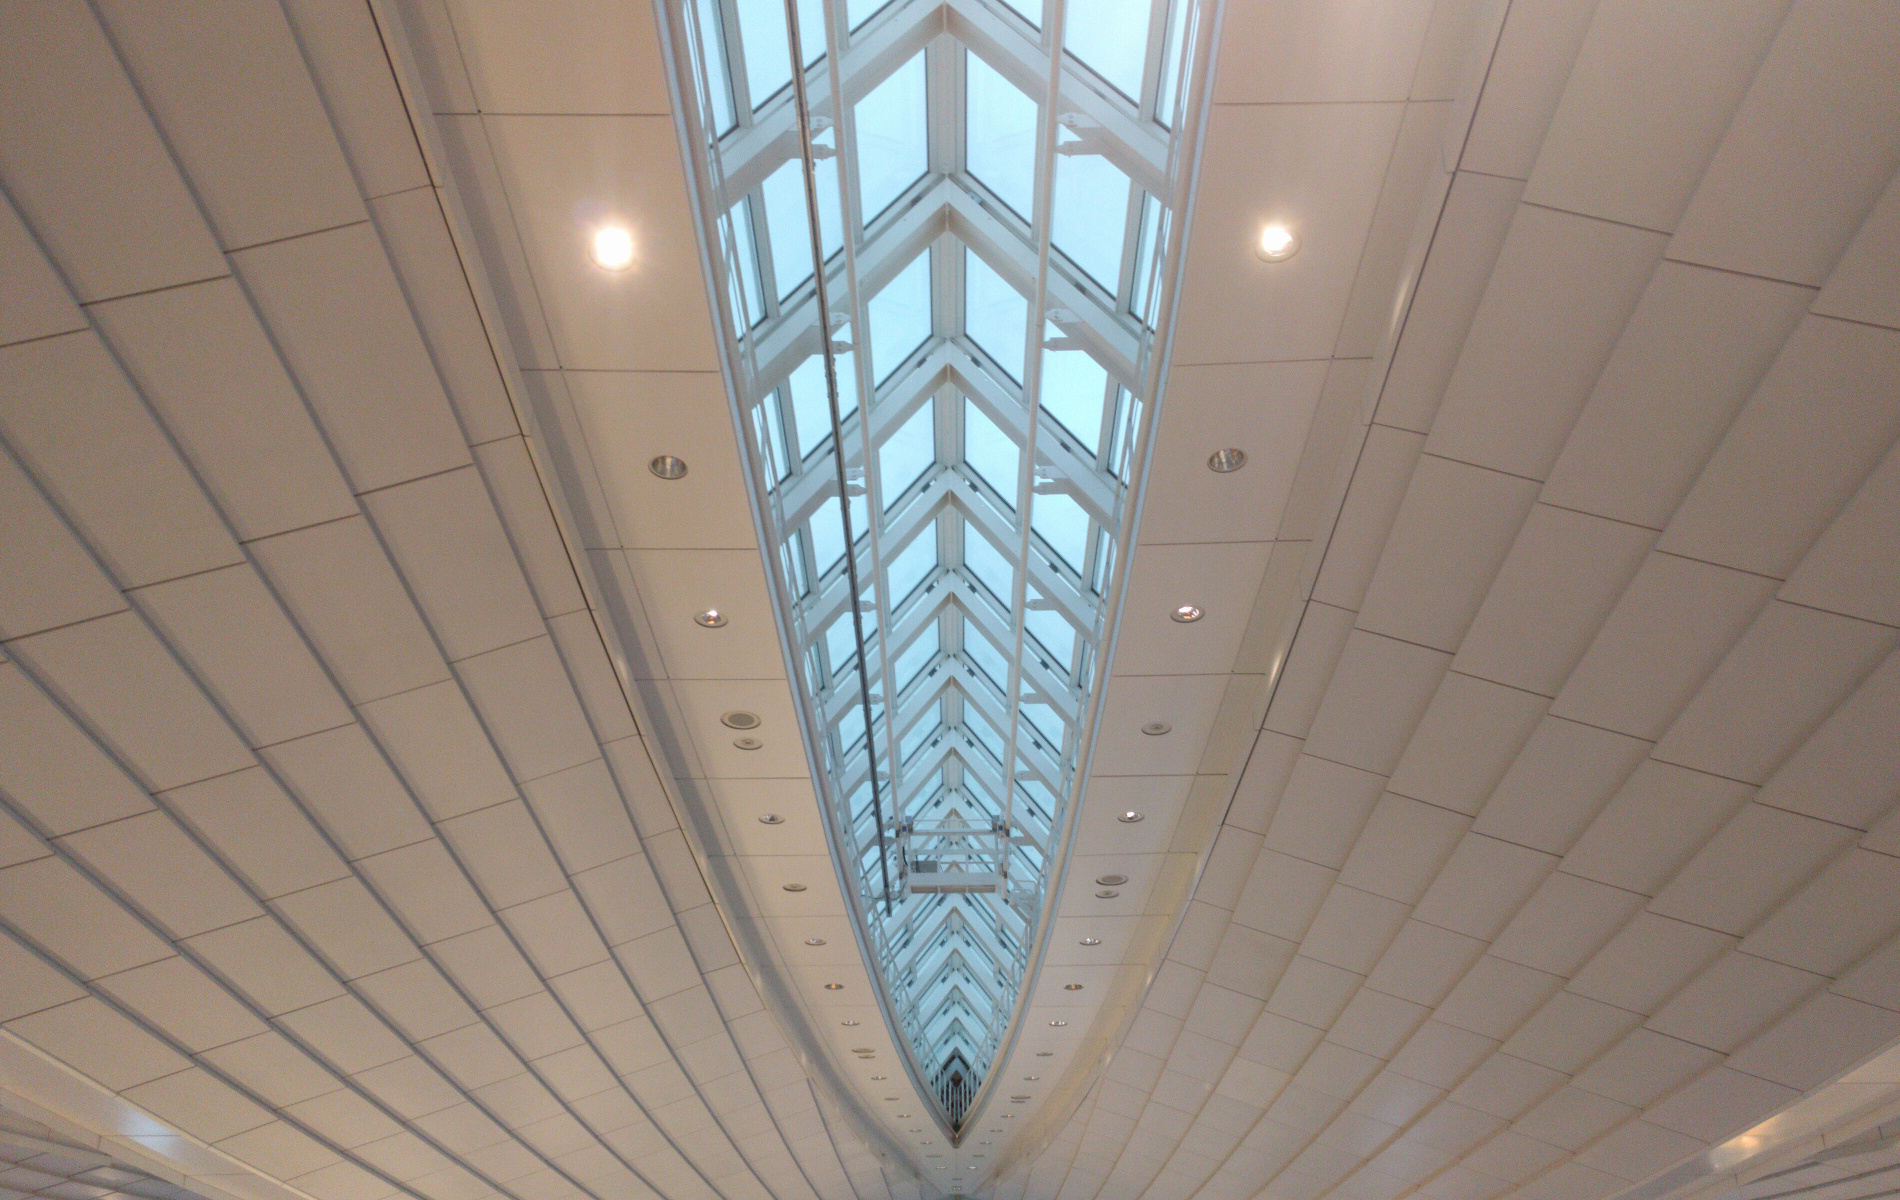 a view of a high ceiling, centred on a long sunroof in the middle